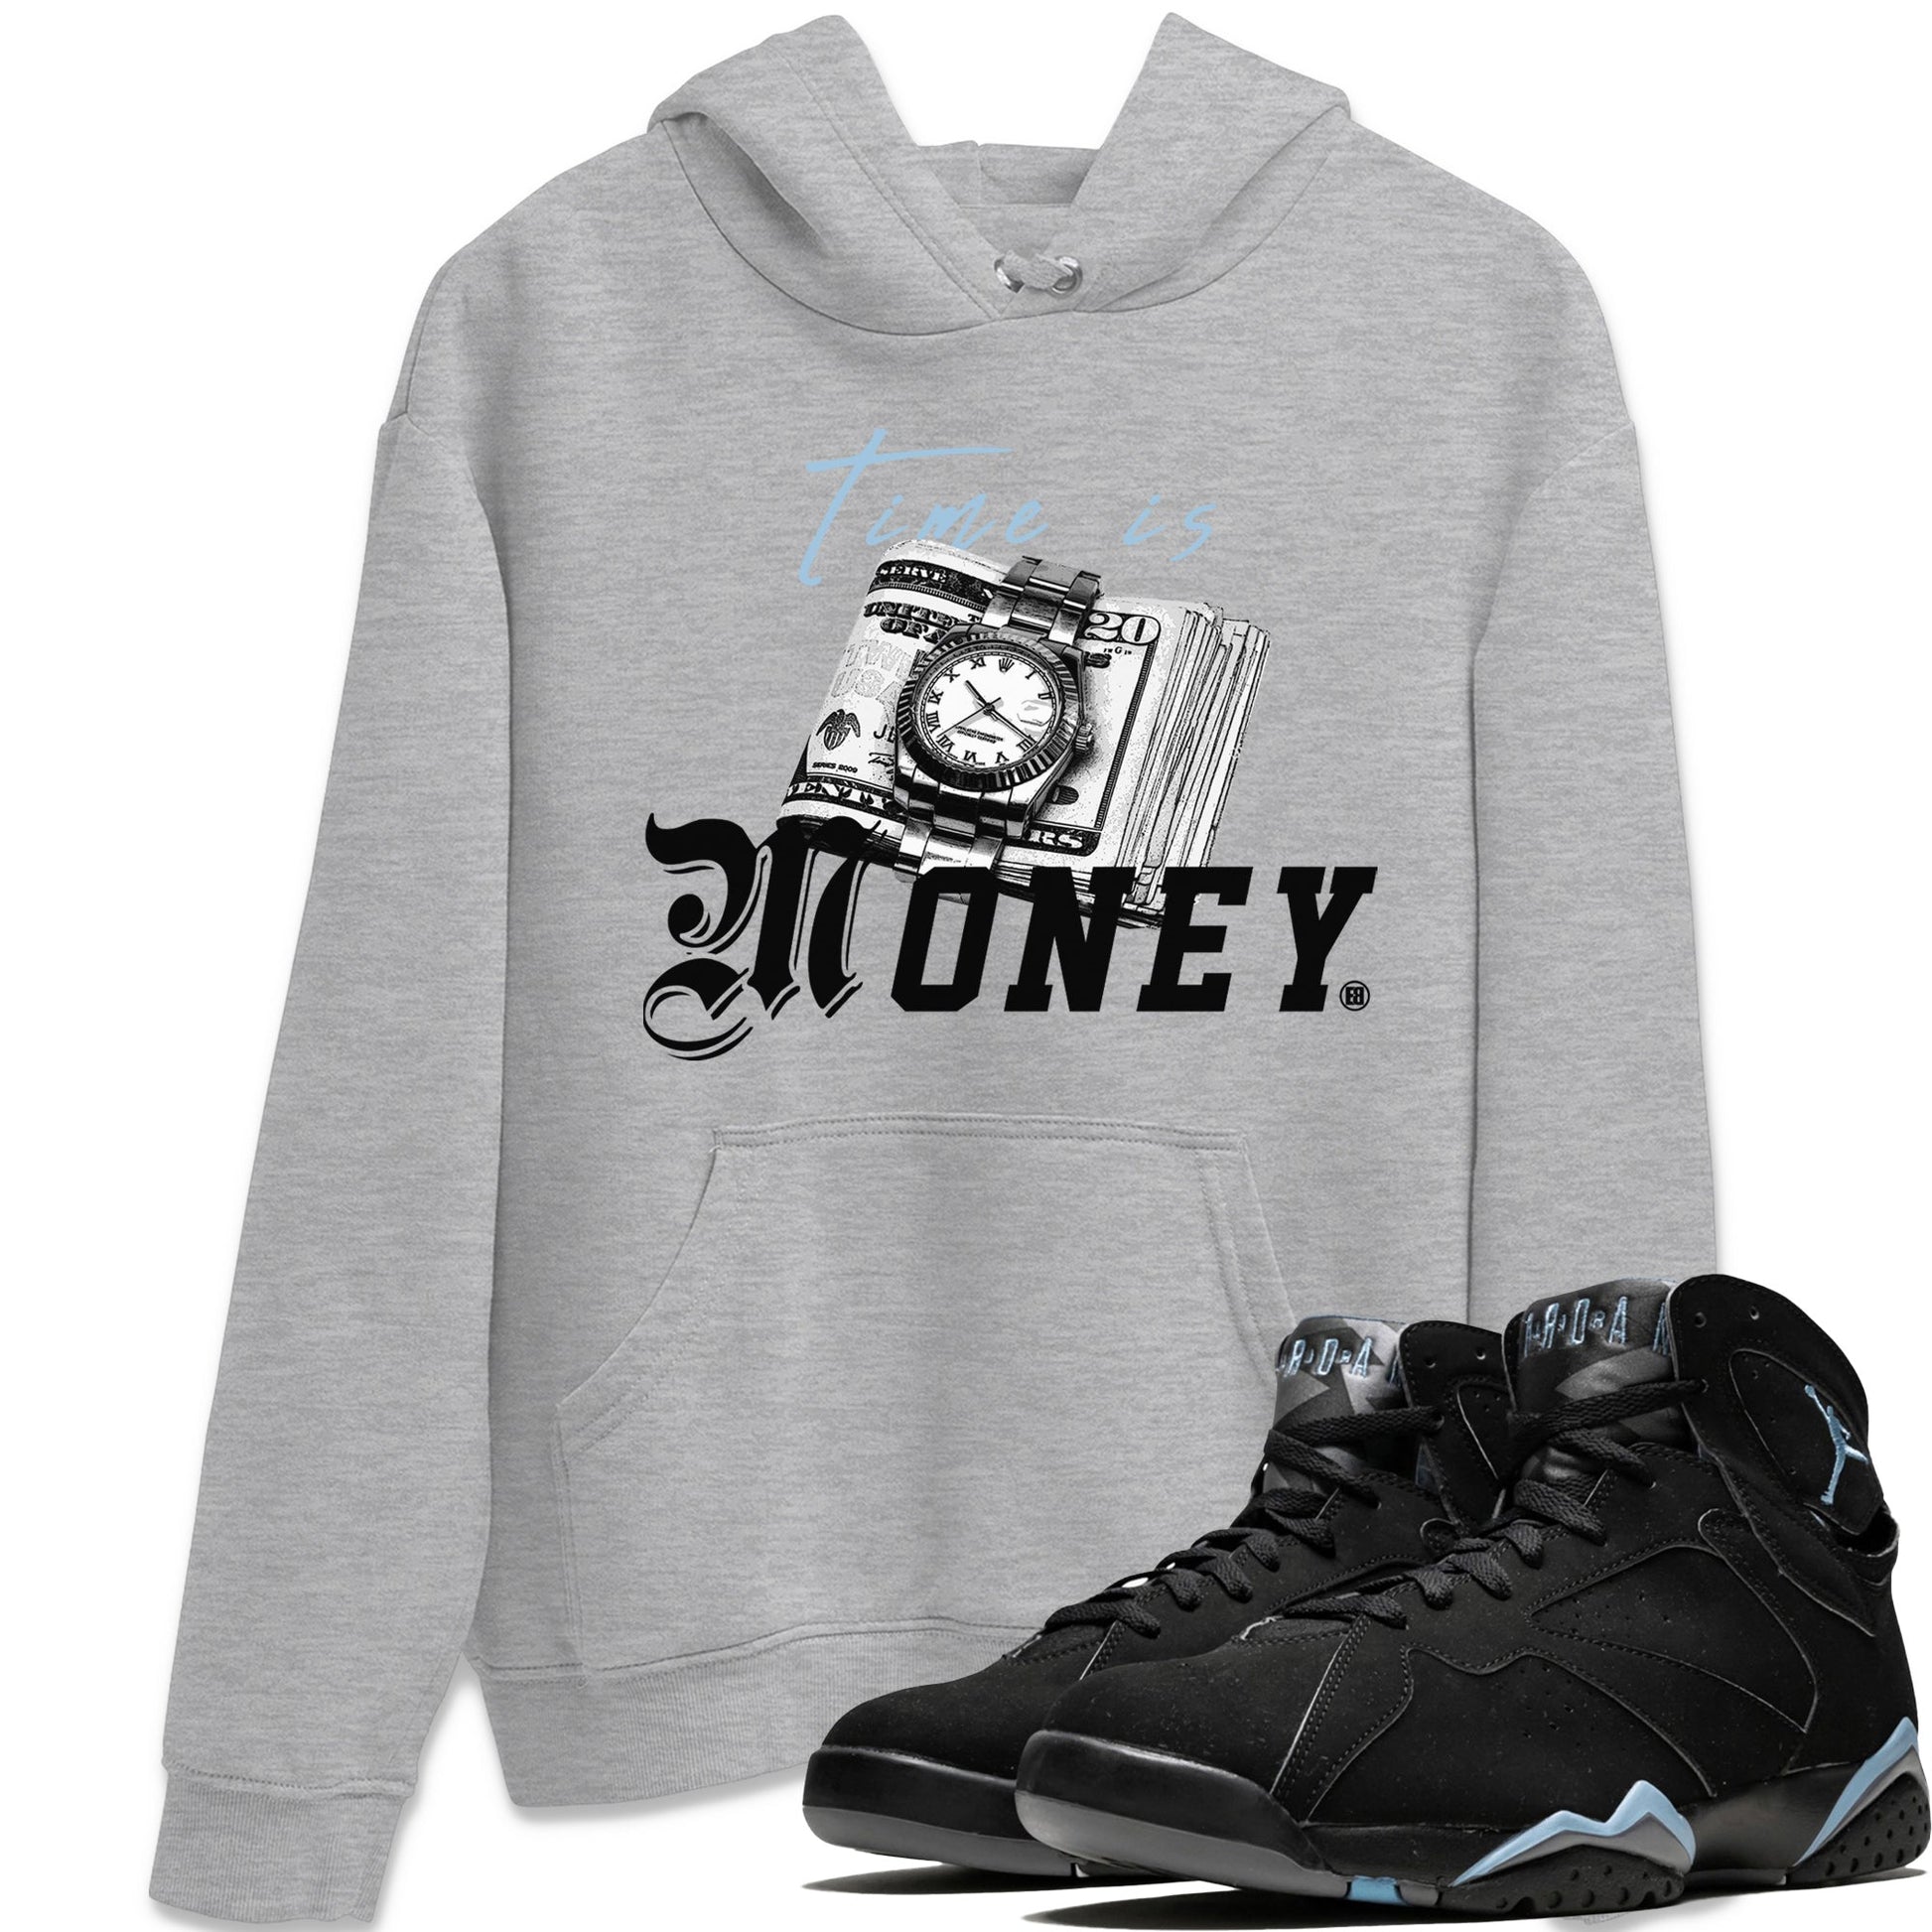 Air Jordan 7 Chambray Sneaker Match Tees Time Is Money Sneaker T-Shirt AJ7 Chambray Sneaker Release Tees Unisex Shirts Heather Grey 1